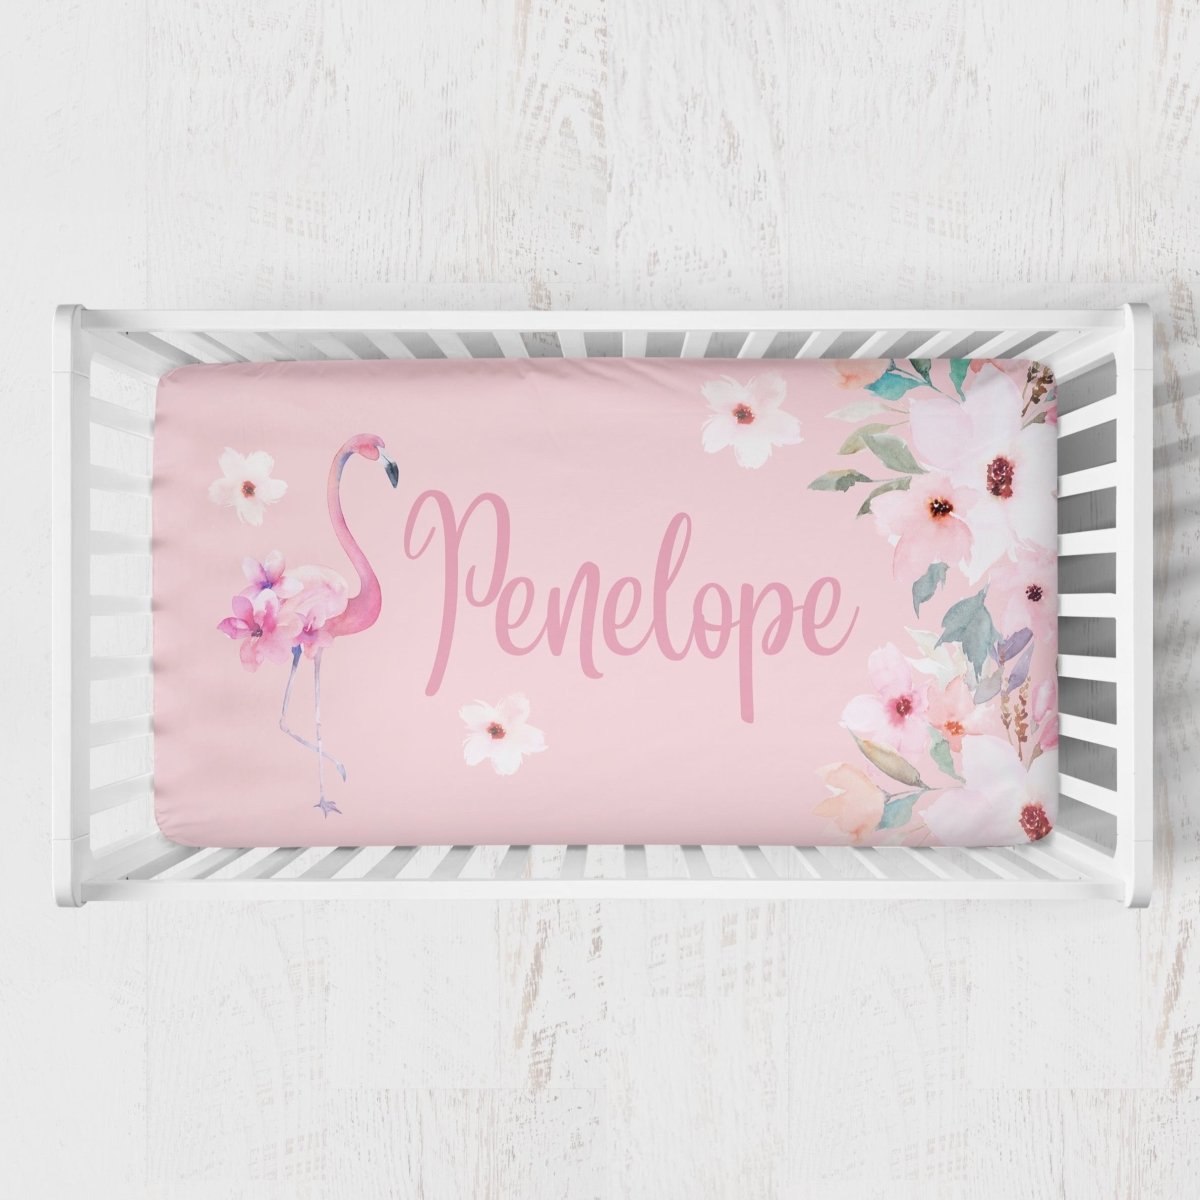 Personalized Floral Crib Sheet - *ALL*, gender_girl, Personalized_Yes